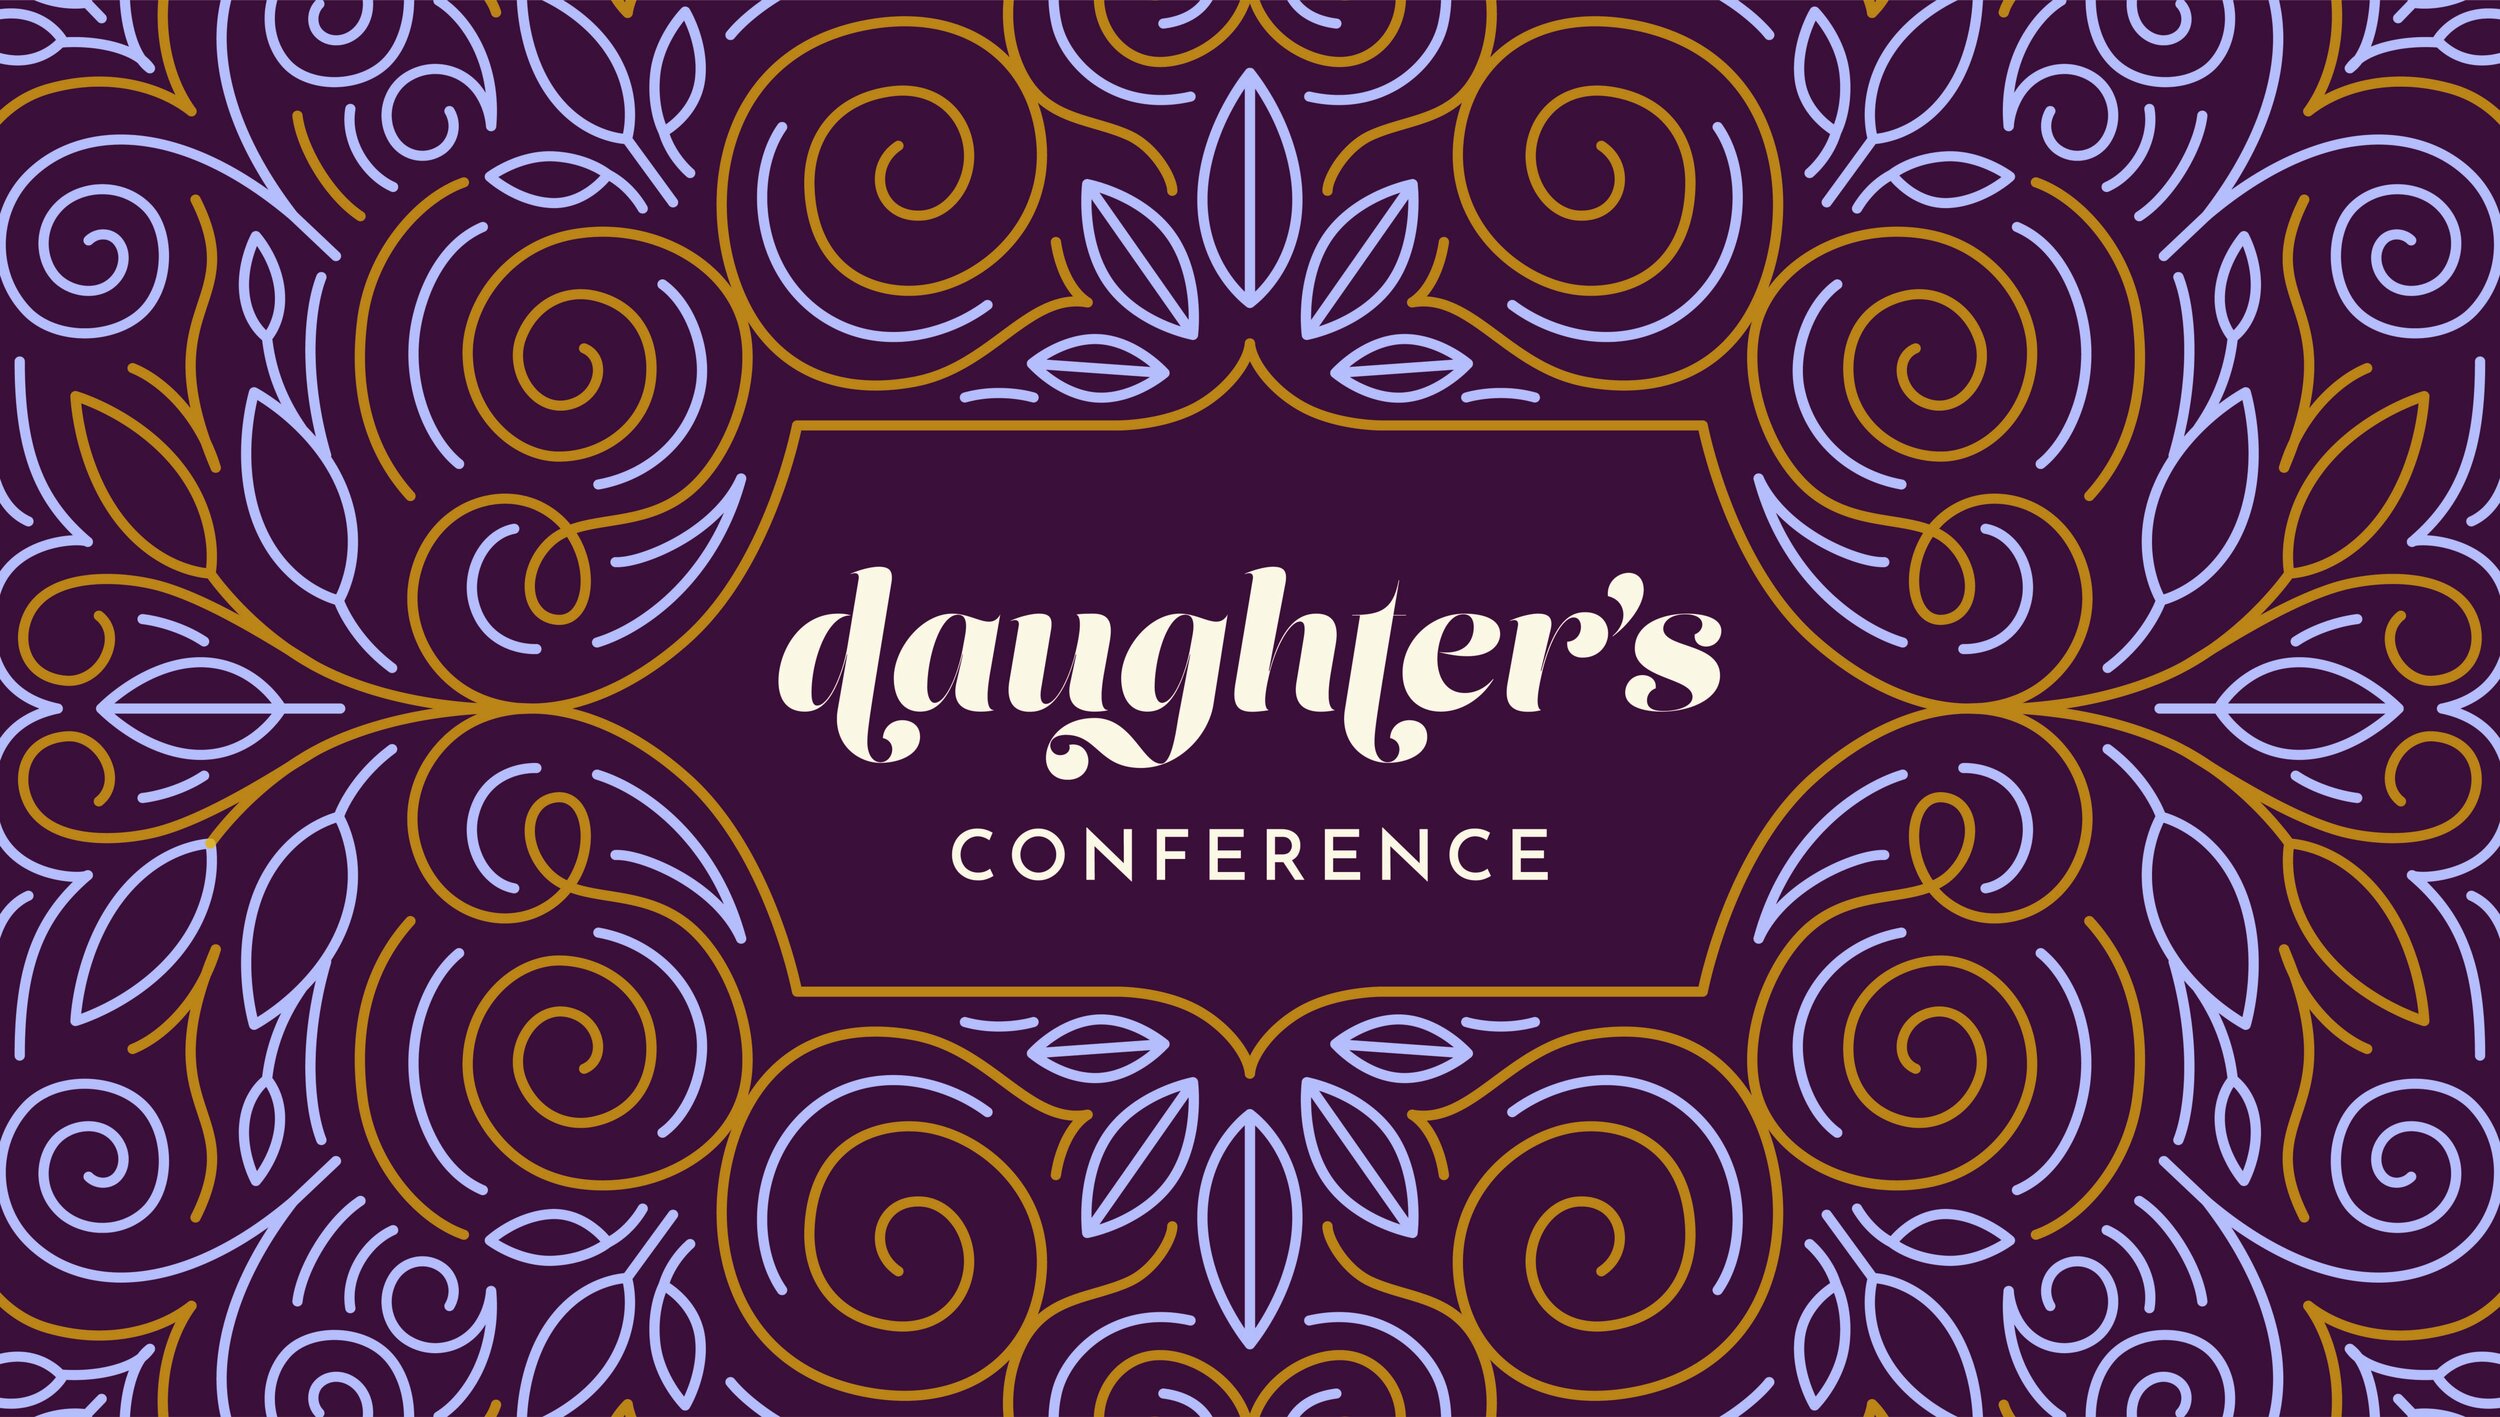 SOUTHEAST | DAUGHTER'S CONFERENCE 2019